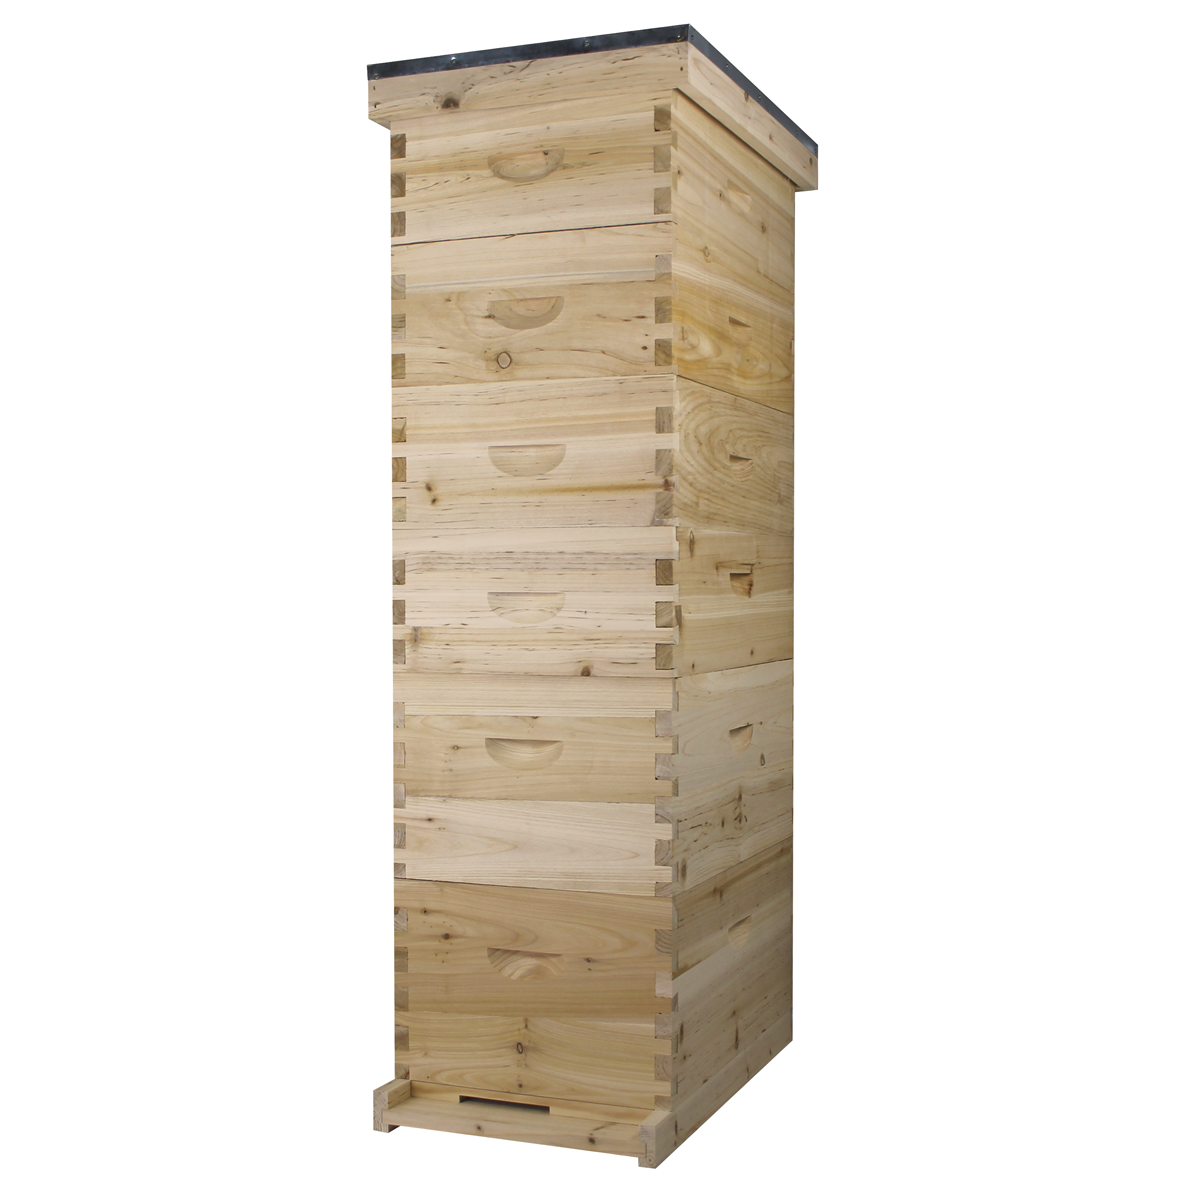 NuBee 8 Frame Beehive With 2 Deep Bee Boxes & 4 Medium Bee Boxes